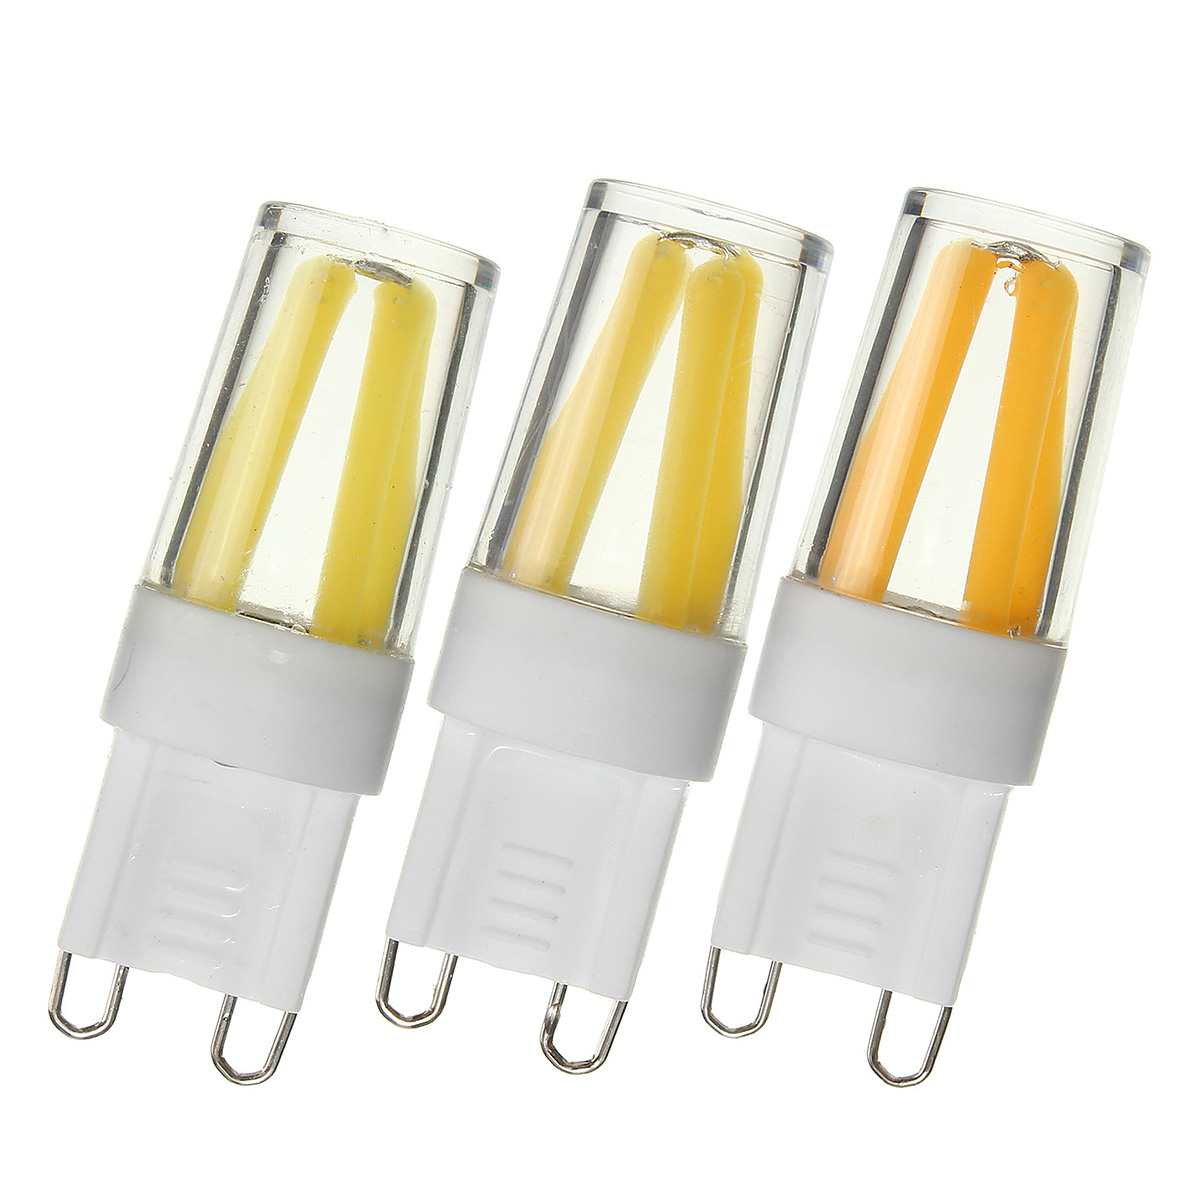 2W-G9-Dimmable-LED-Pure-White-Warm-White-Corn-Bulb-Silicone-Crystal-COB-Lamp-Light-AC-220V-1292383-1